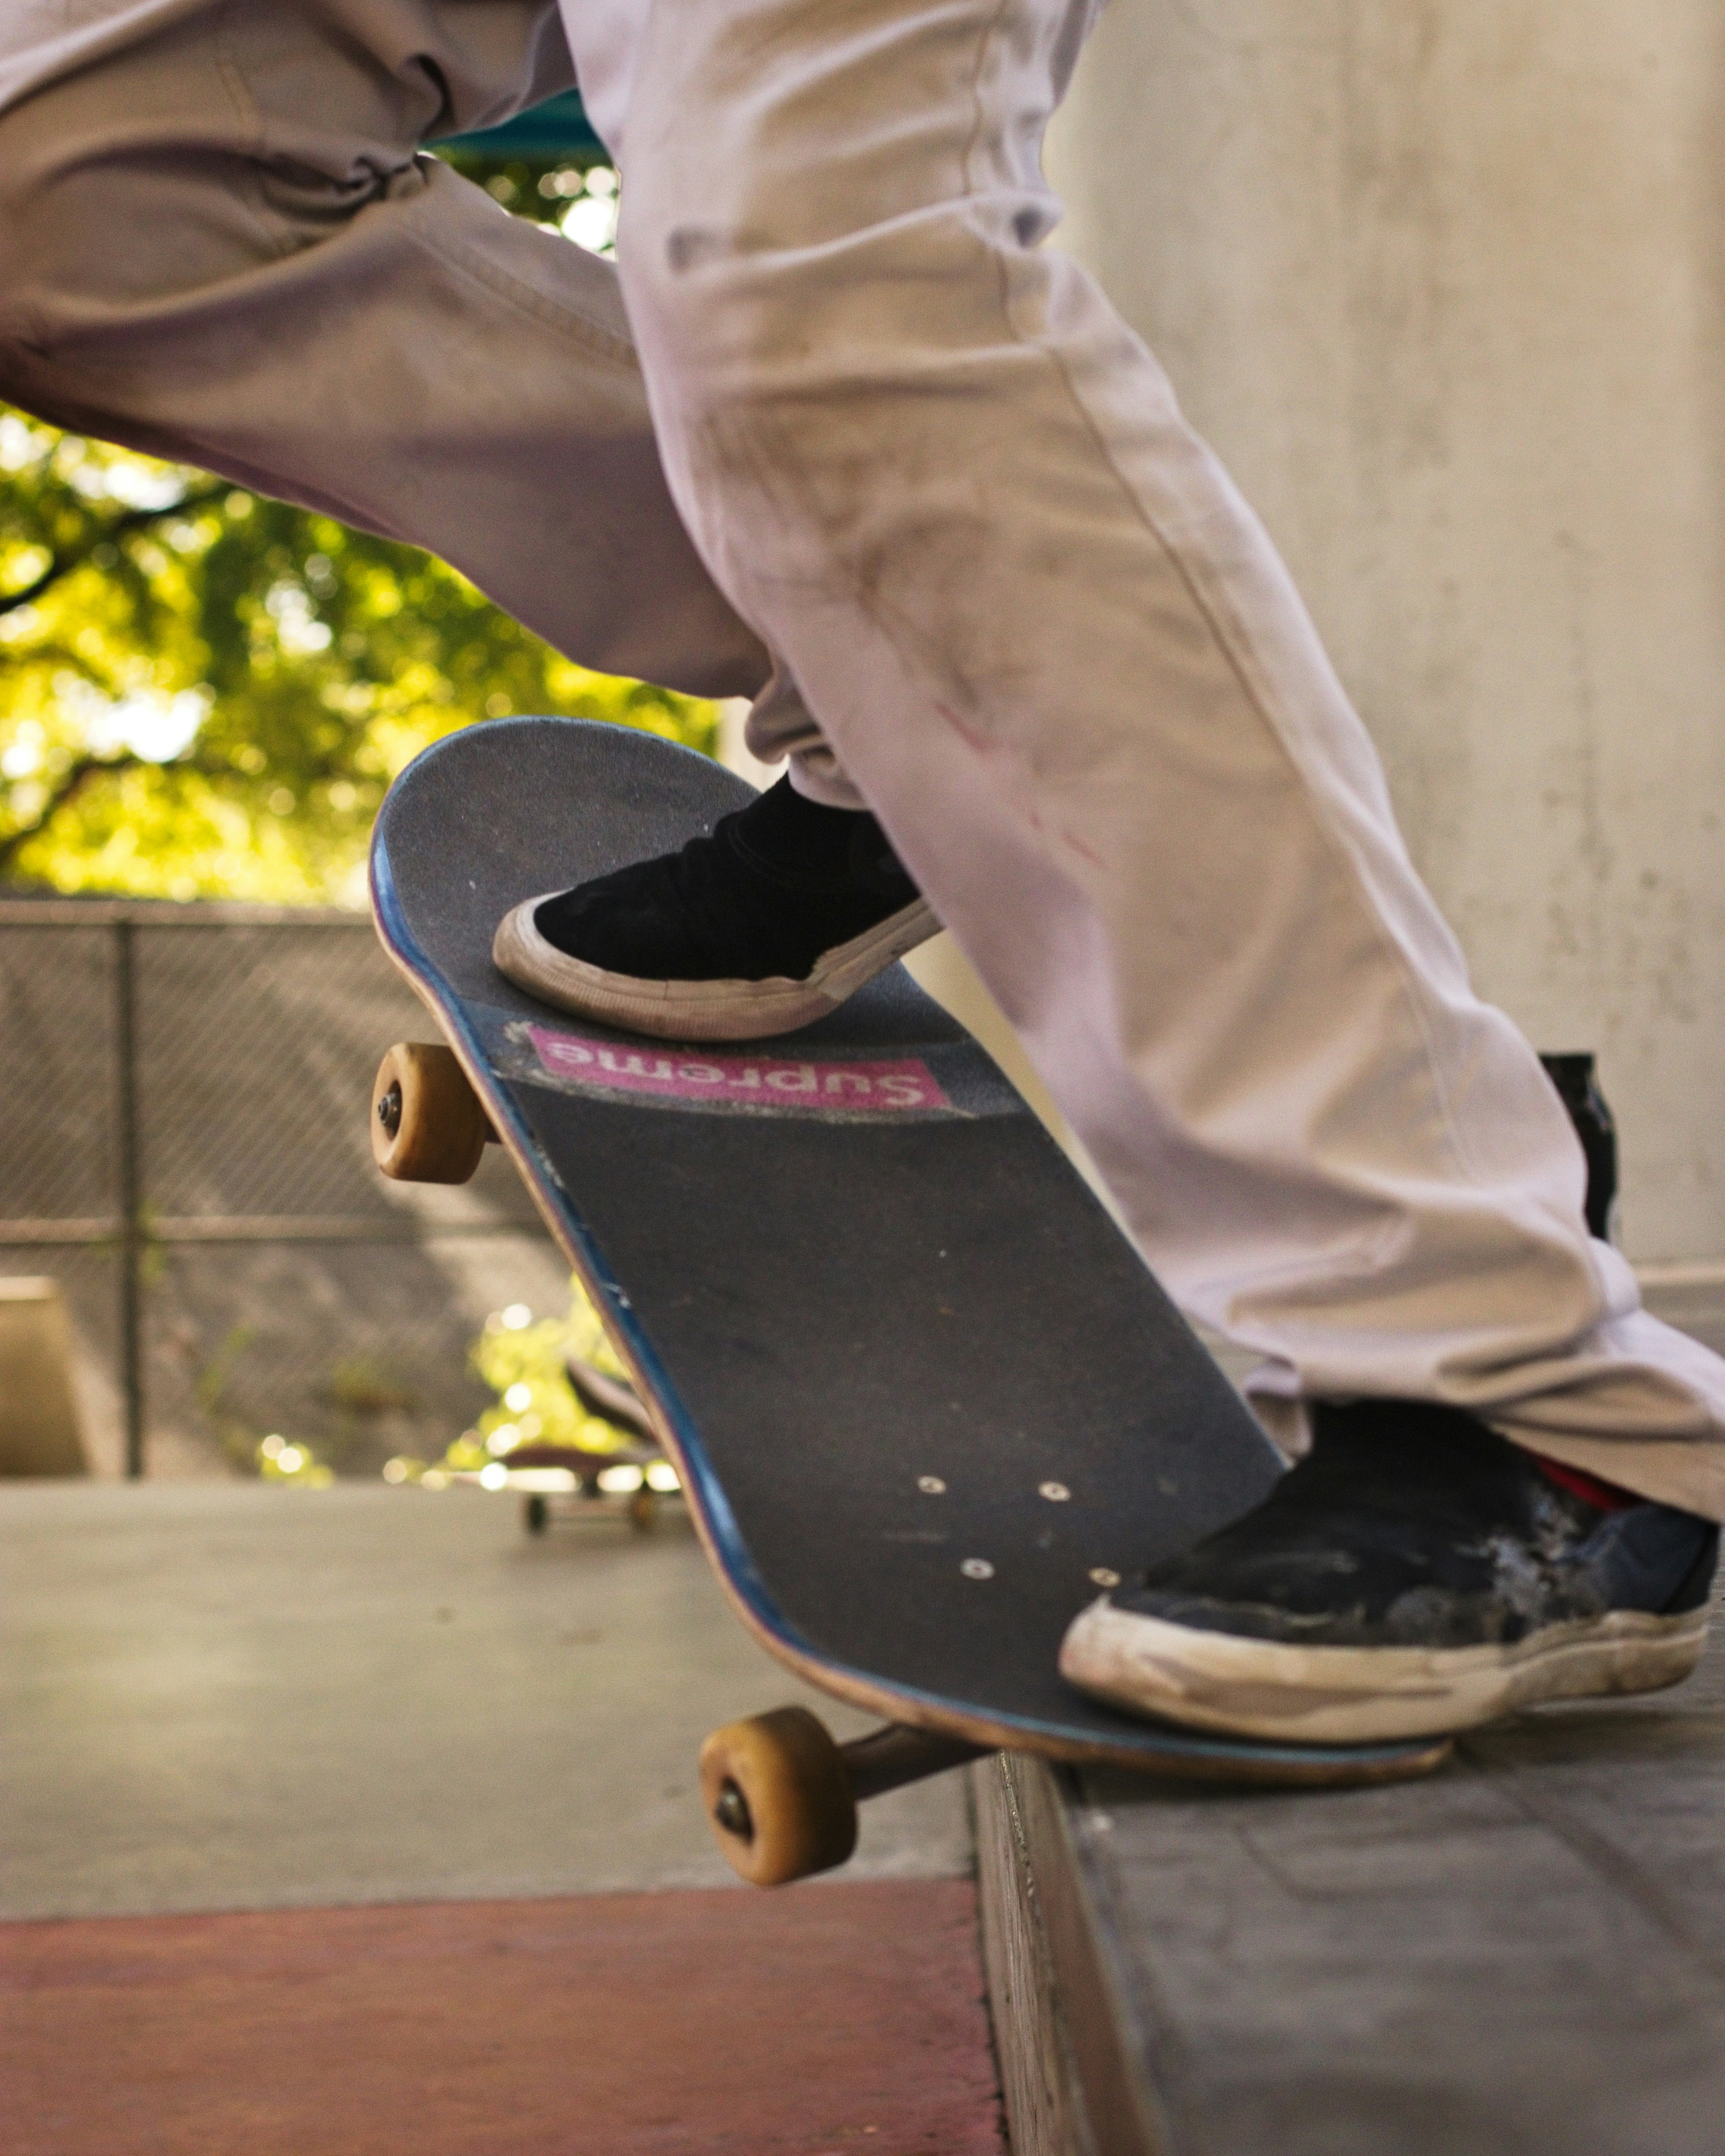 person in white pants and black and white nike sneakers sitting on black and red skateboard